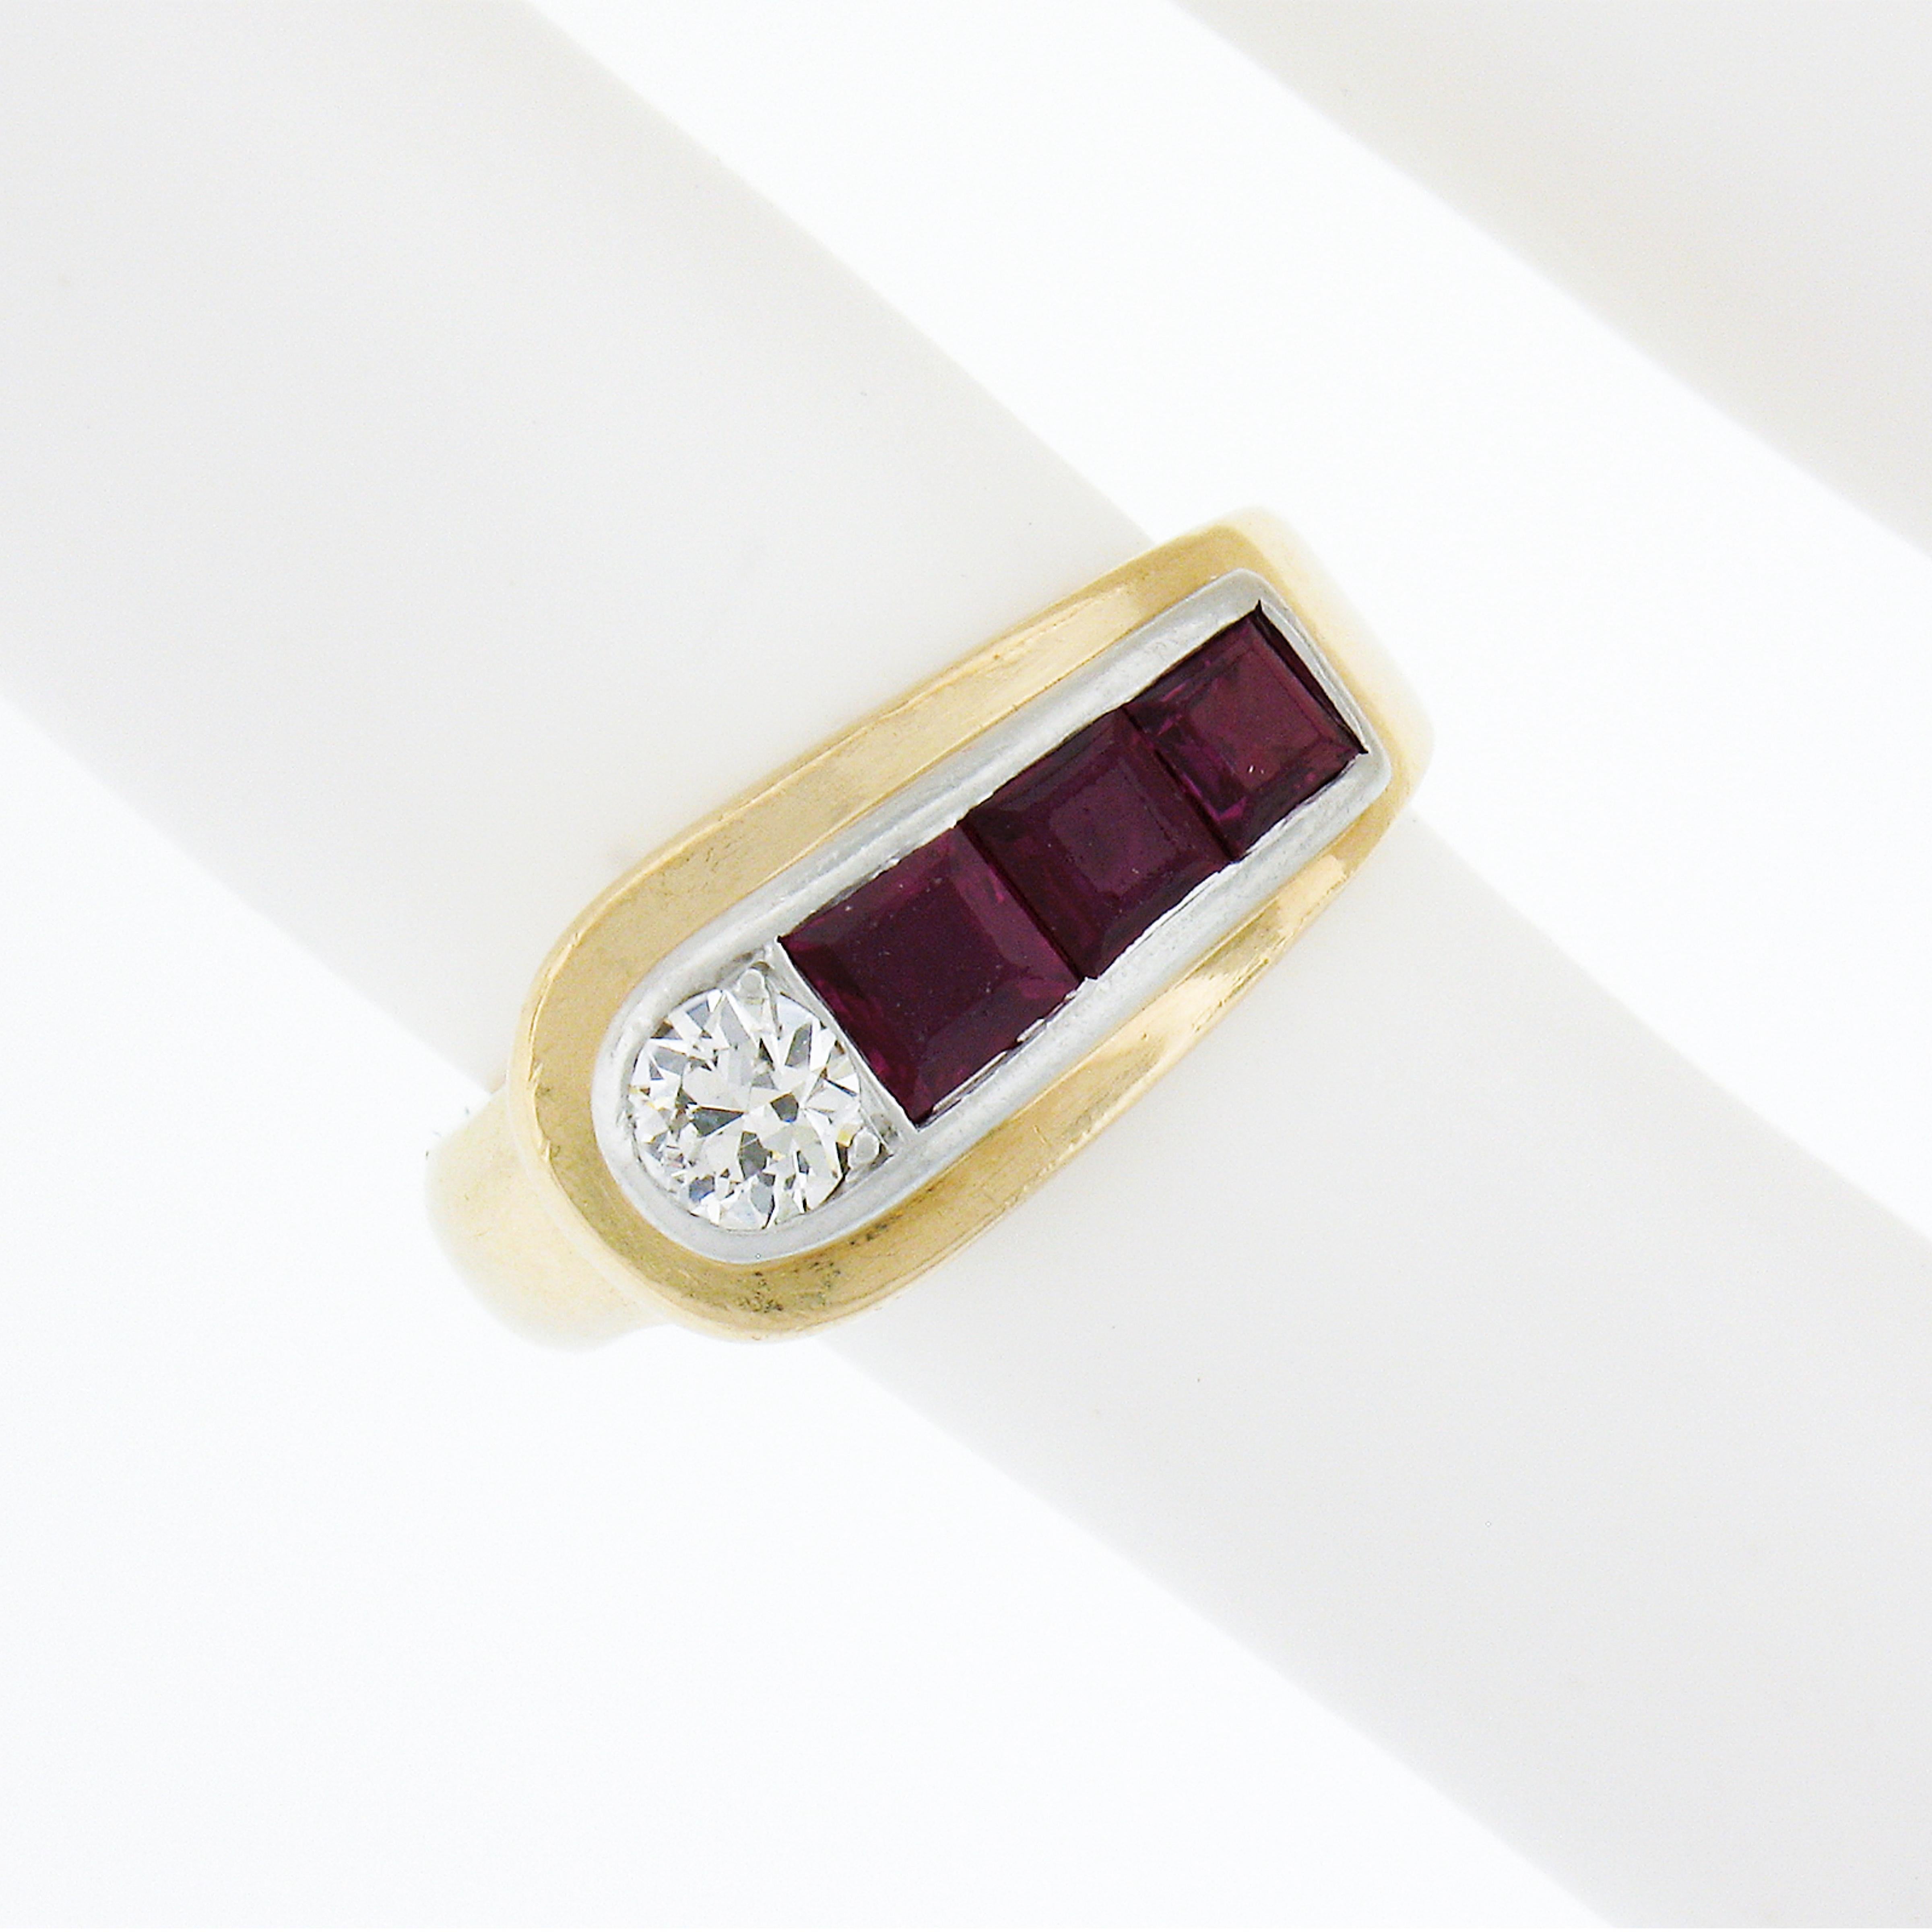 Maurice Tishman Retro 14k Gold & Platinum Diamond & Ruby Buckle Style Band Ring In Good Condition For Sale In Montclair, NJ